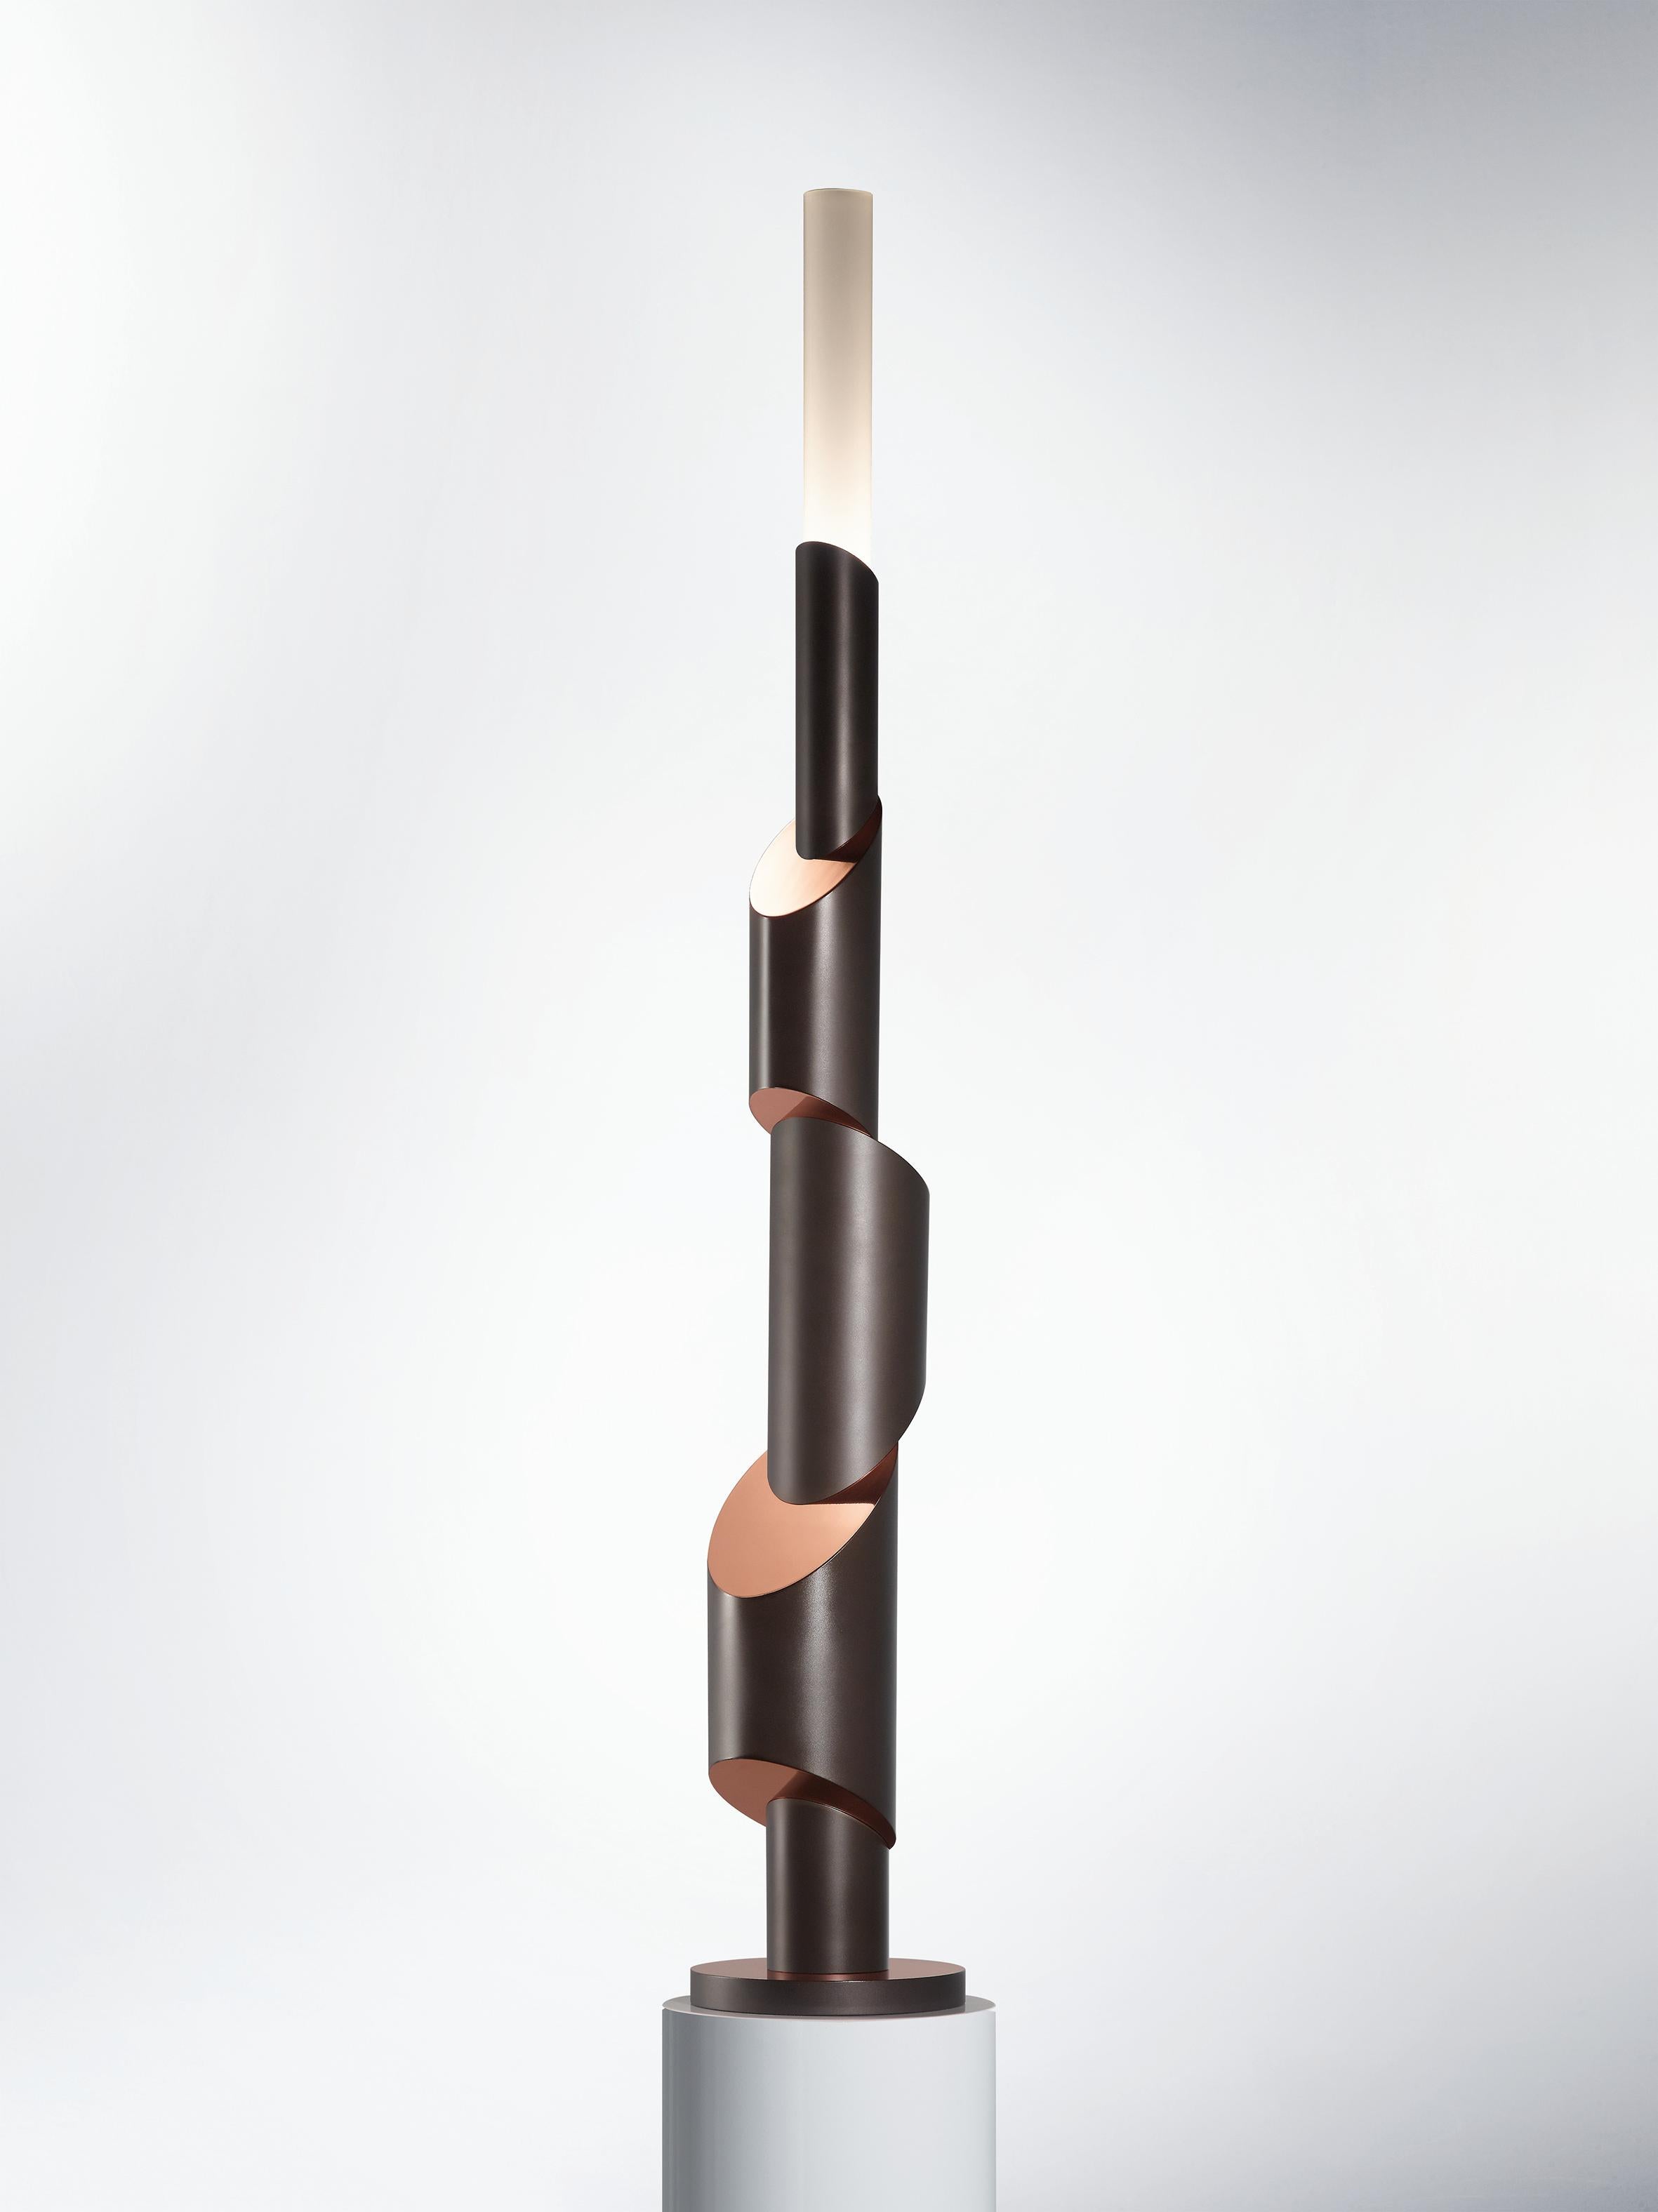 Modern 21st Century Design Totem I Floor lamp with Smoked Nickel and Copper Finish